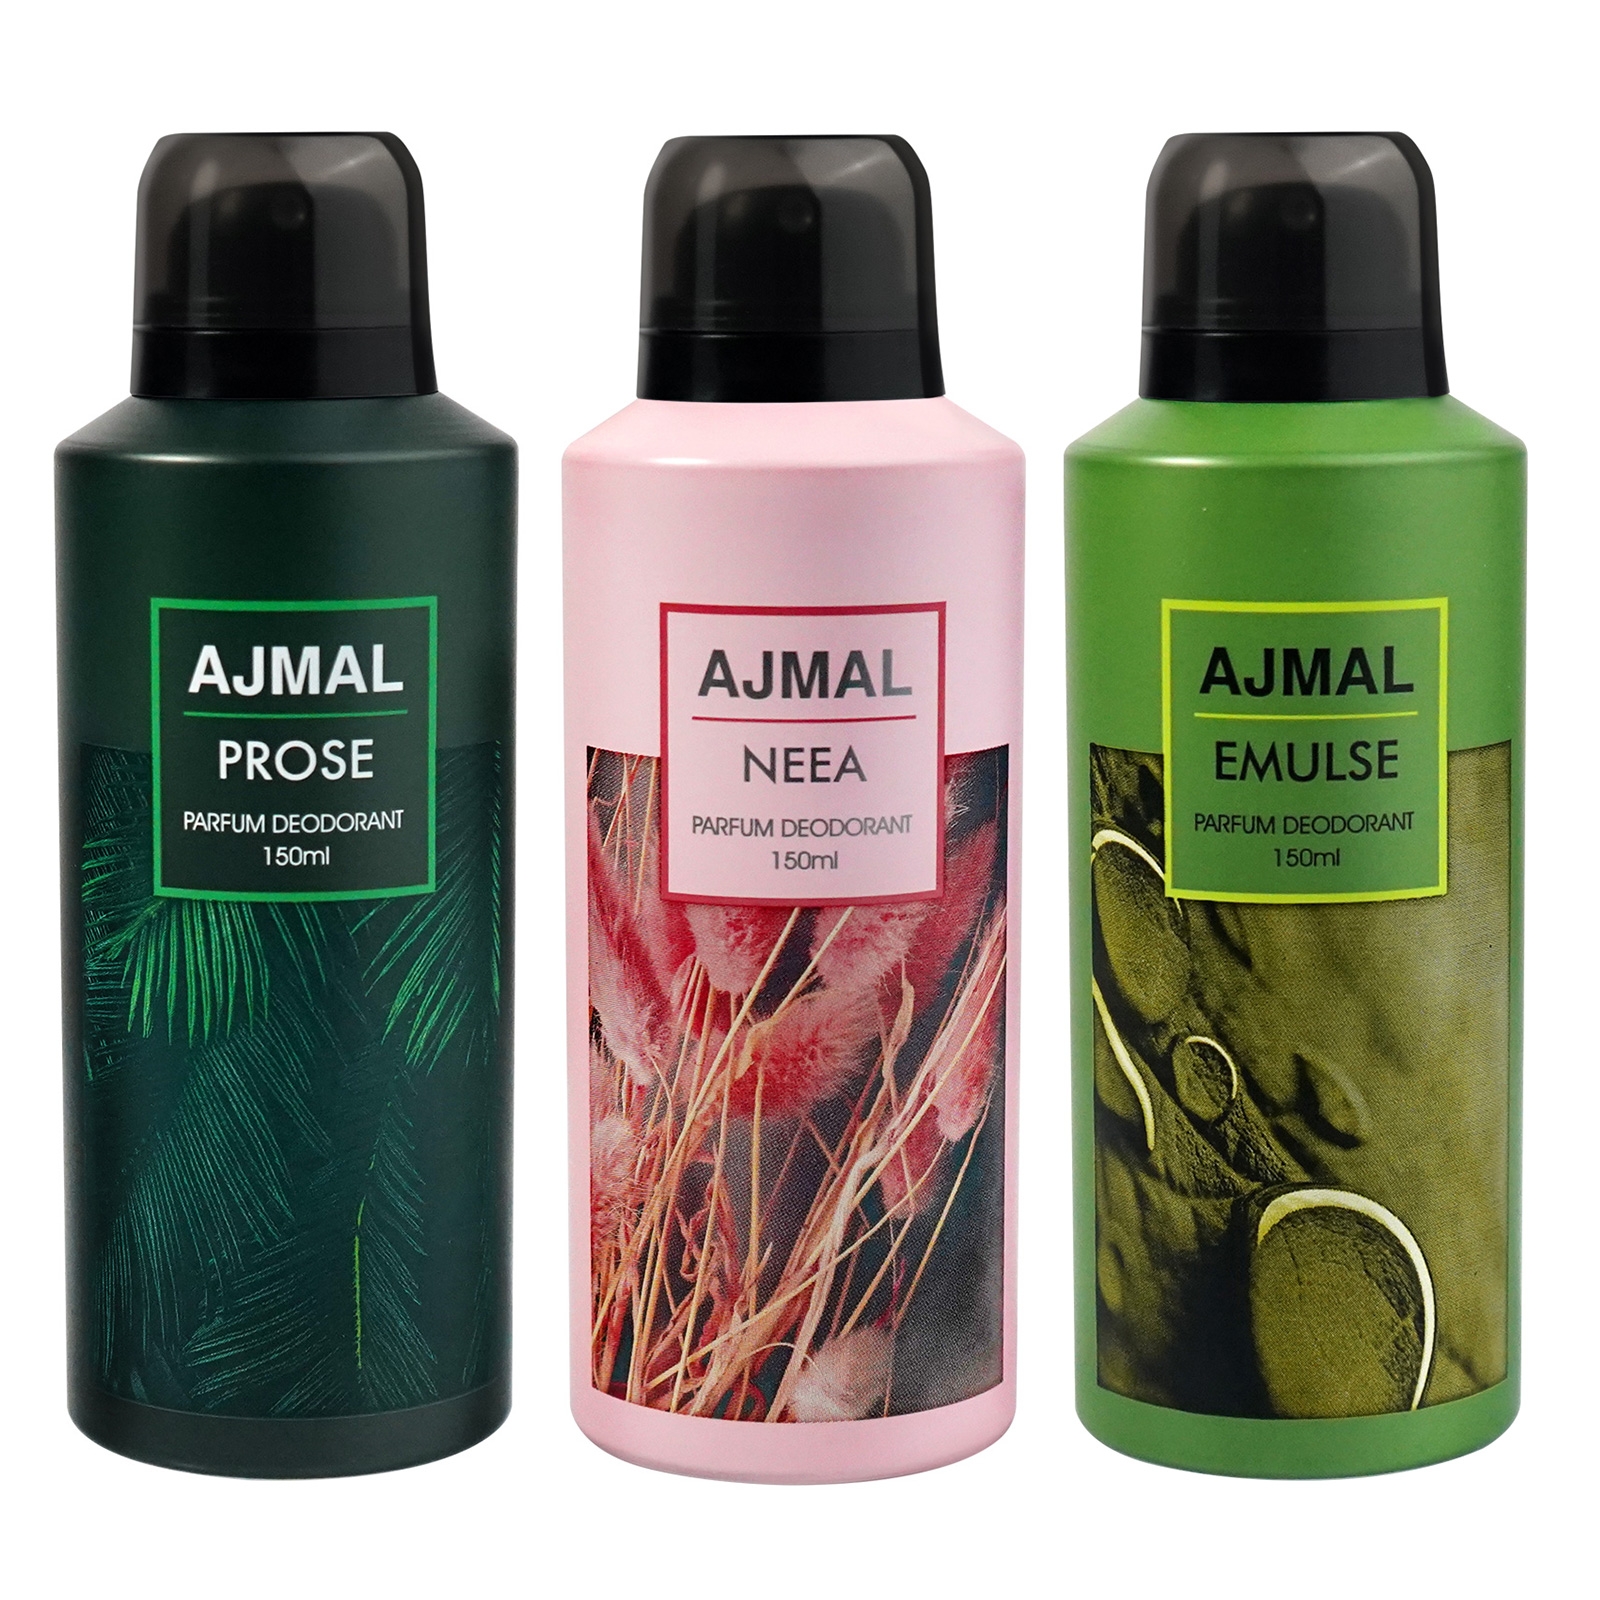 Ajmal | Ajmal Prose, Neea and Emulse Deodorant Perfume 150ML Each Long Lasting Spray Party Wear Gift For Men and Women Online Exclusive 0